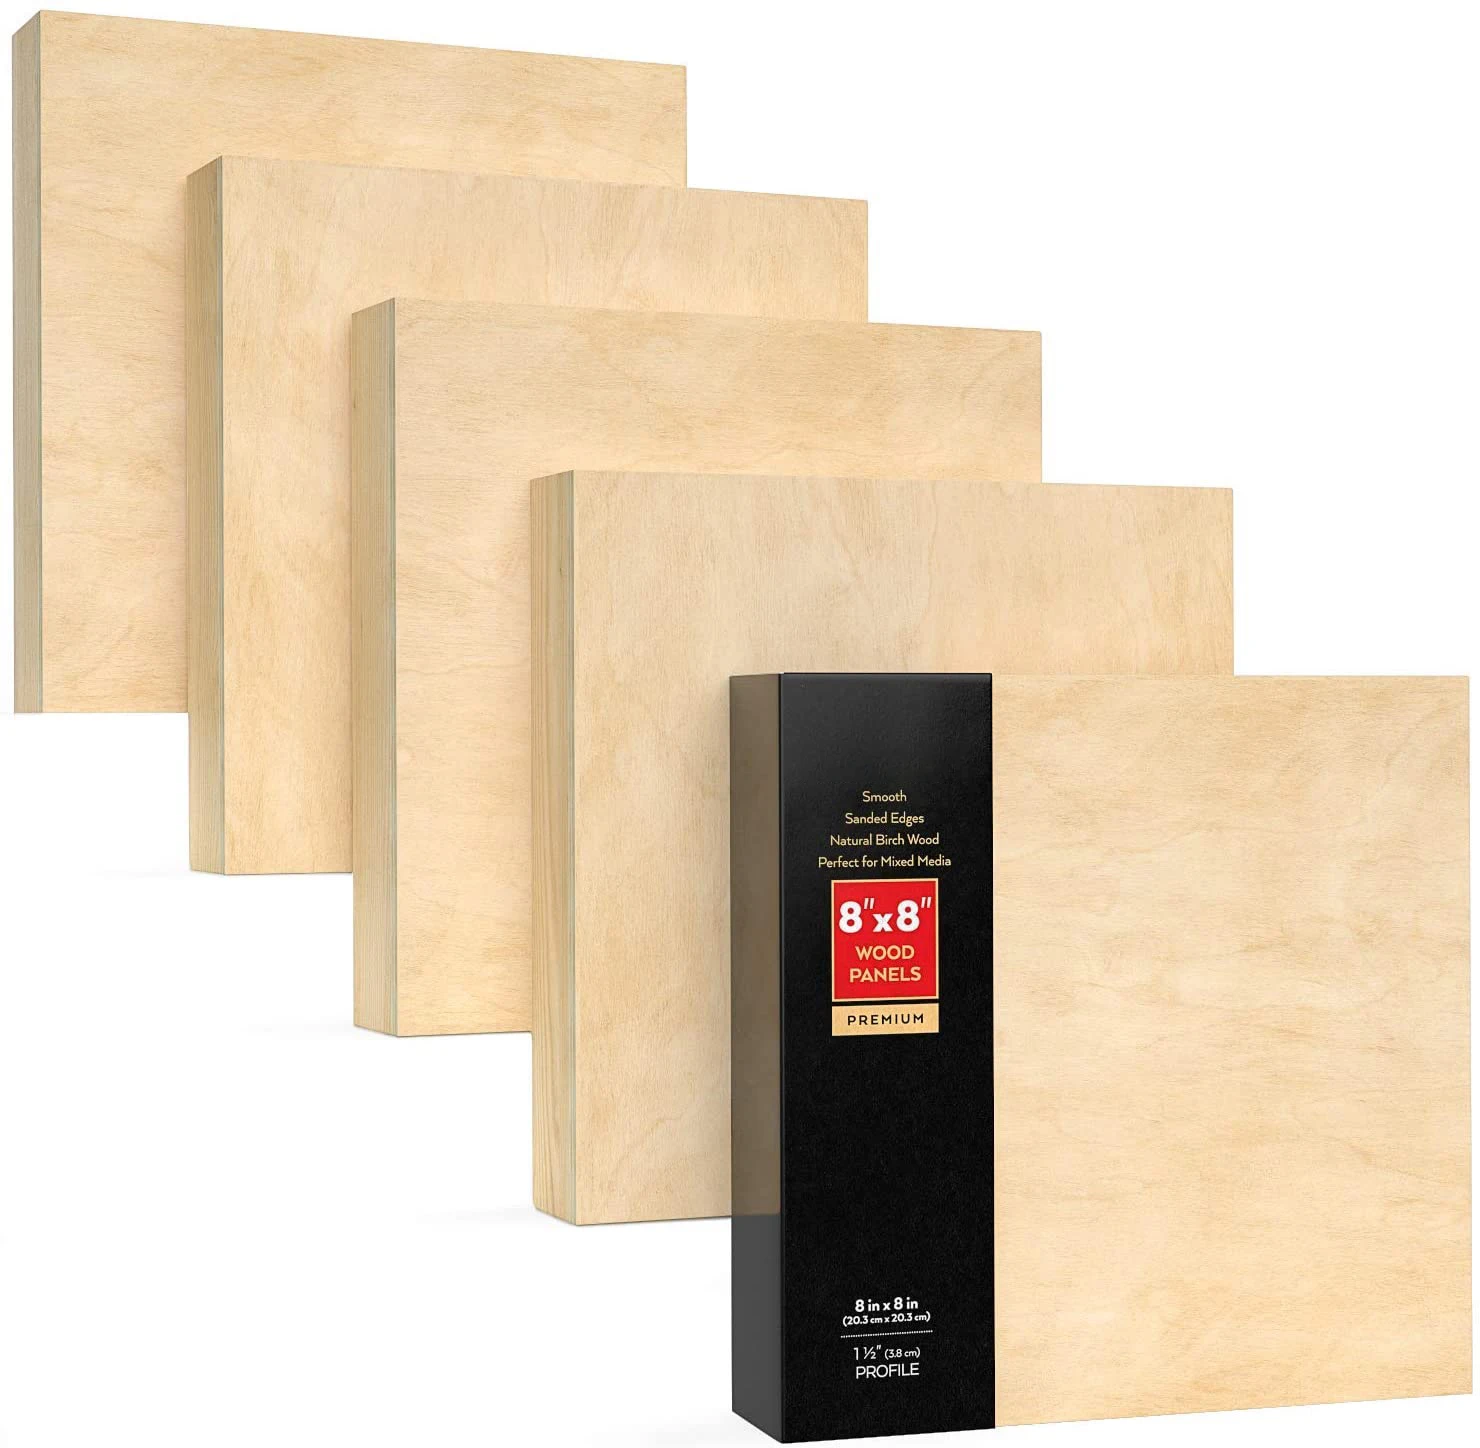 Pack of 4 MEEDEN 8x8 Inch Wood Canvas Panels Gallery 1-1/2'' Deep Cradle Artist Birch Wood Panels for Pouring Art Acrylics Encaustic Crafts Painting Mixed-Media with Oils 